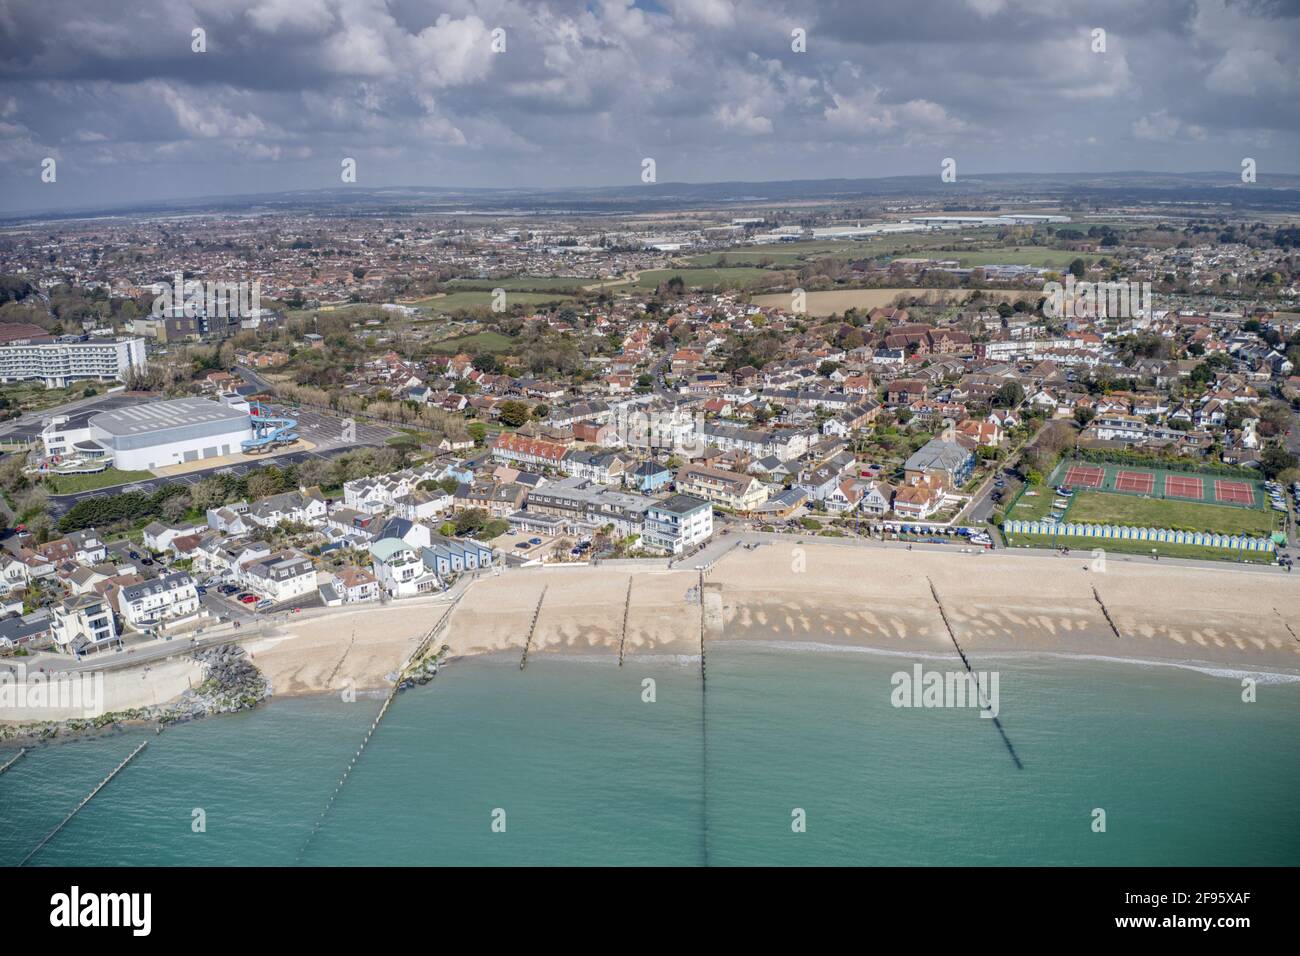 Aerial View of Felpham Village a popular seaside destination in West Sussex and close to Bognor Regis holiday resort town.. Stock Photo